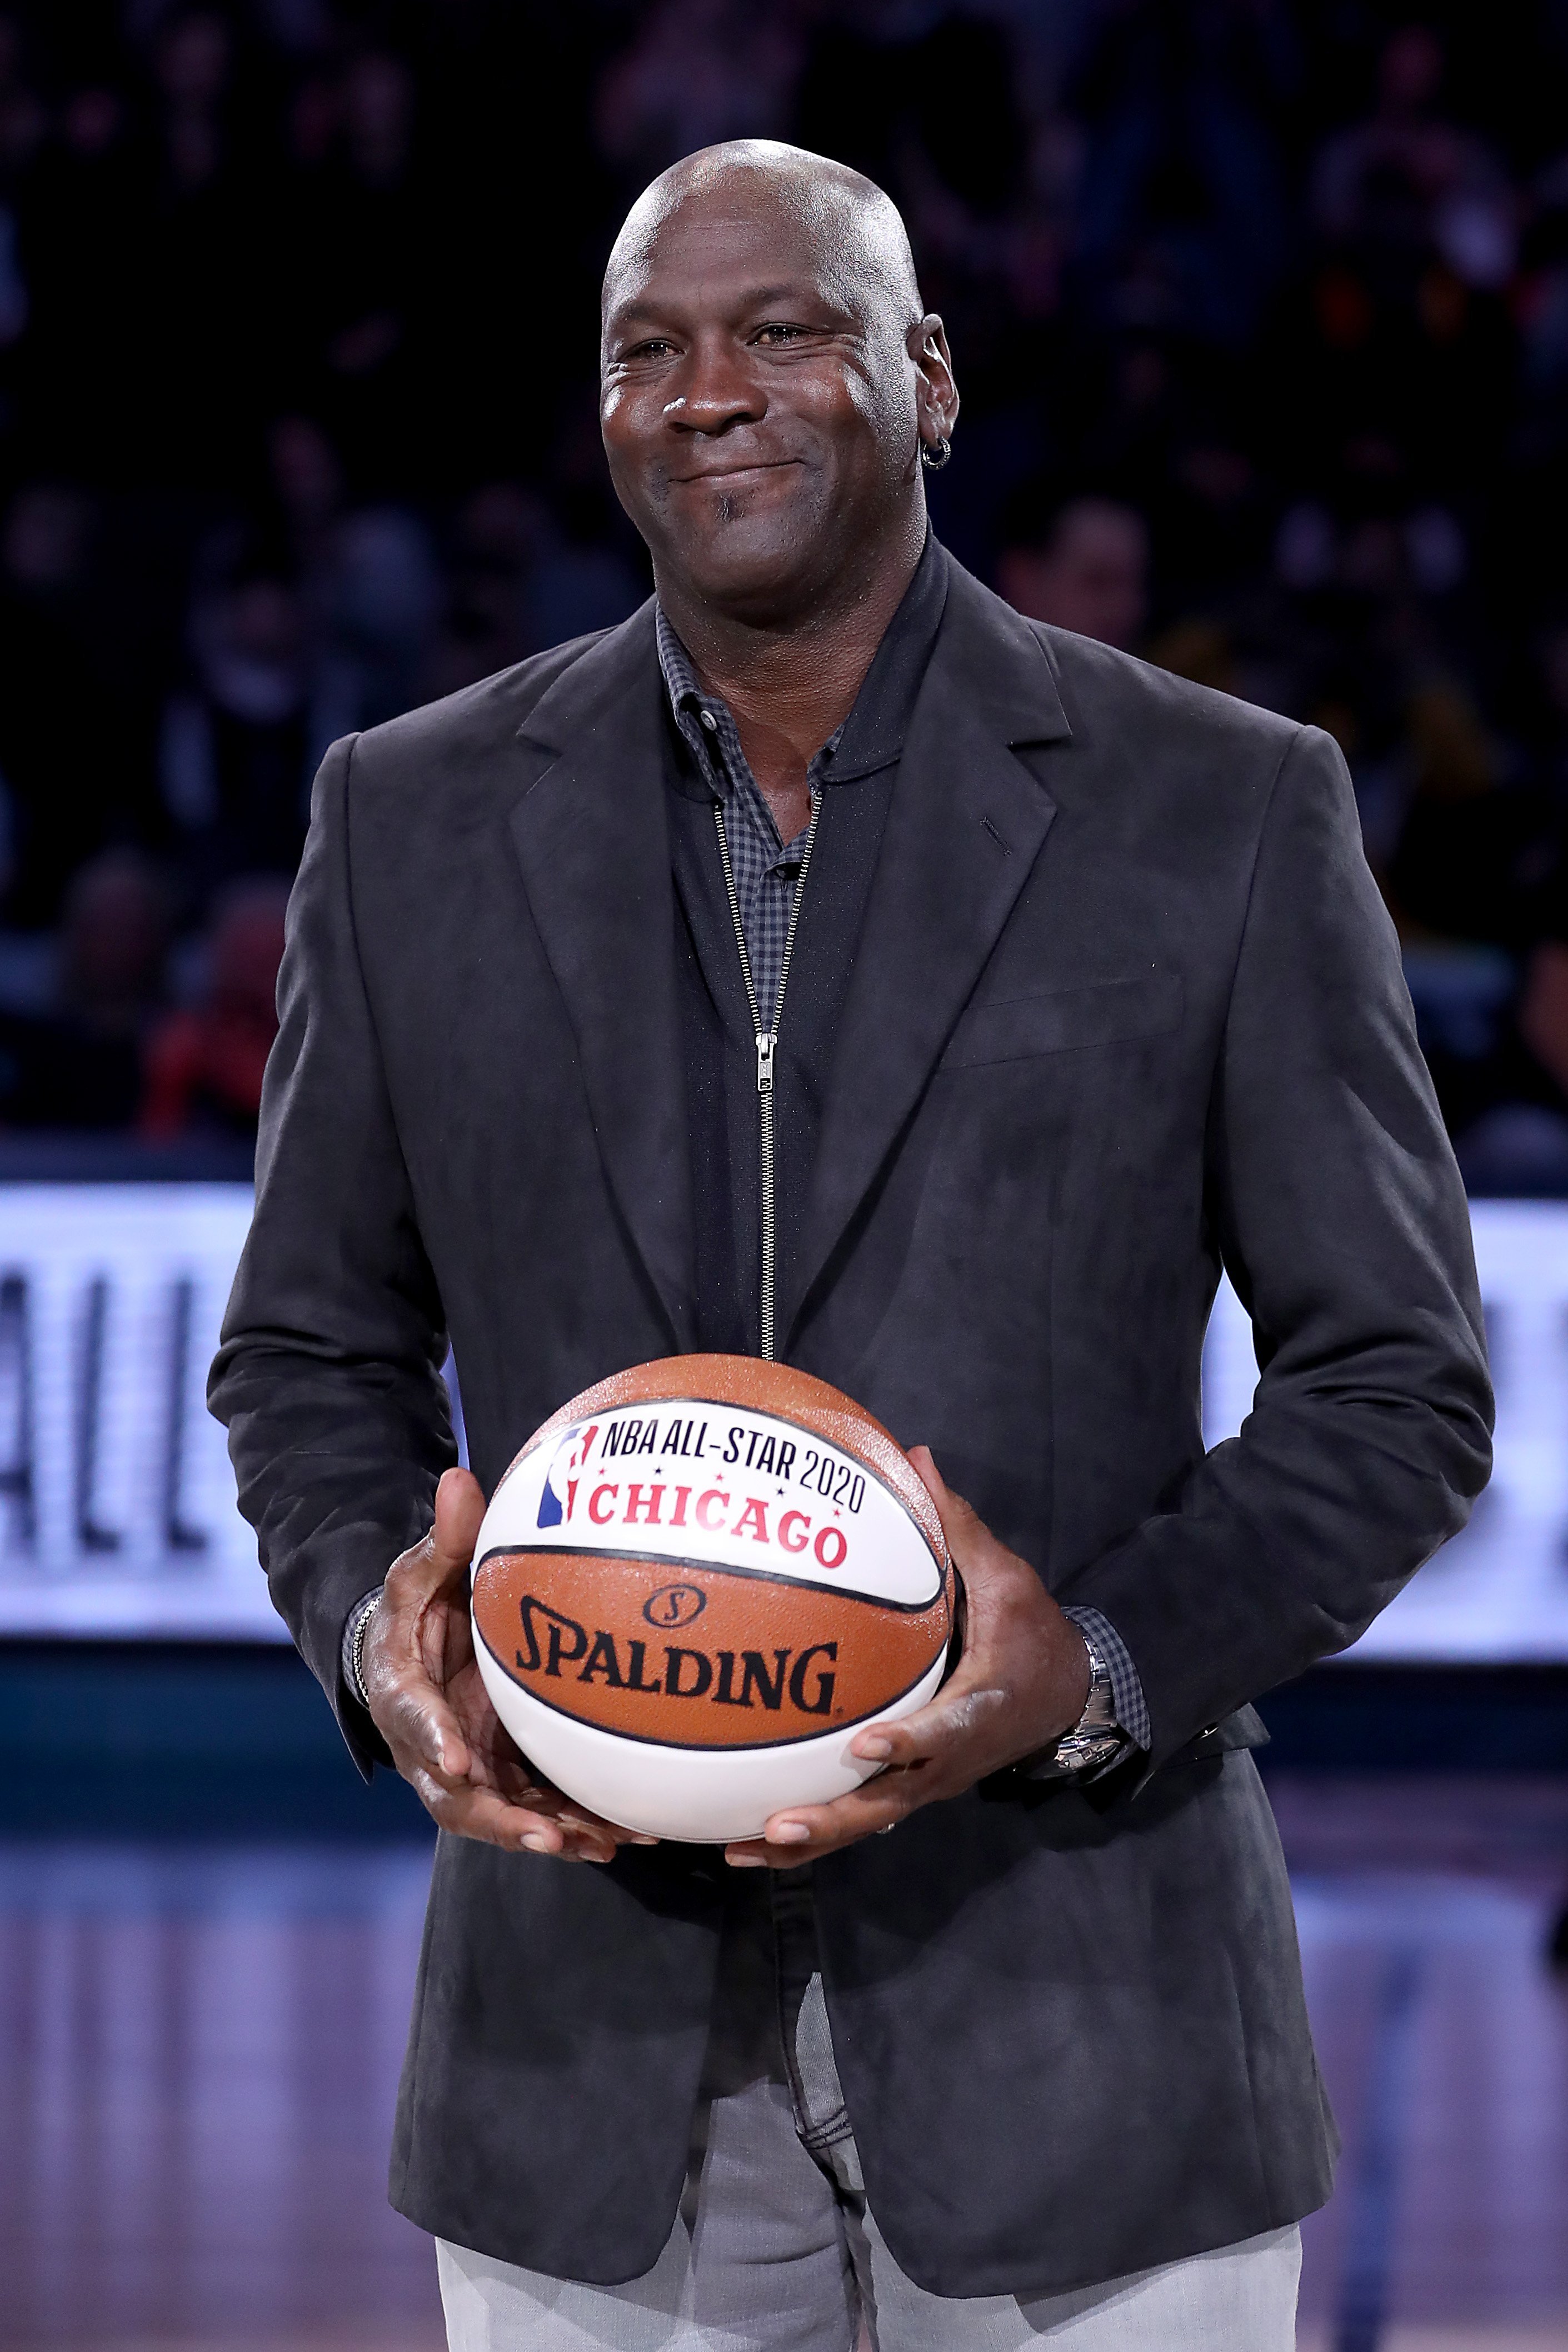 NBA icon Michael Jordan honors the 2020 NBA All-Star game in February 2019. | Photo: Getty Images